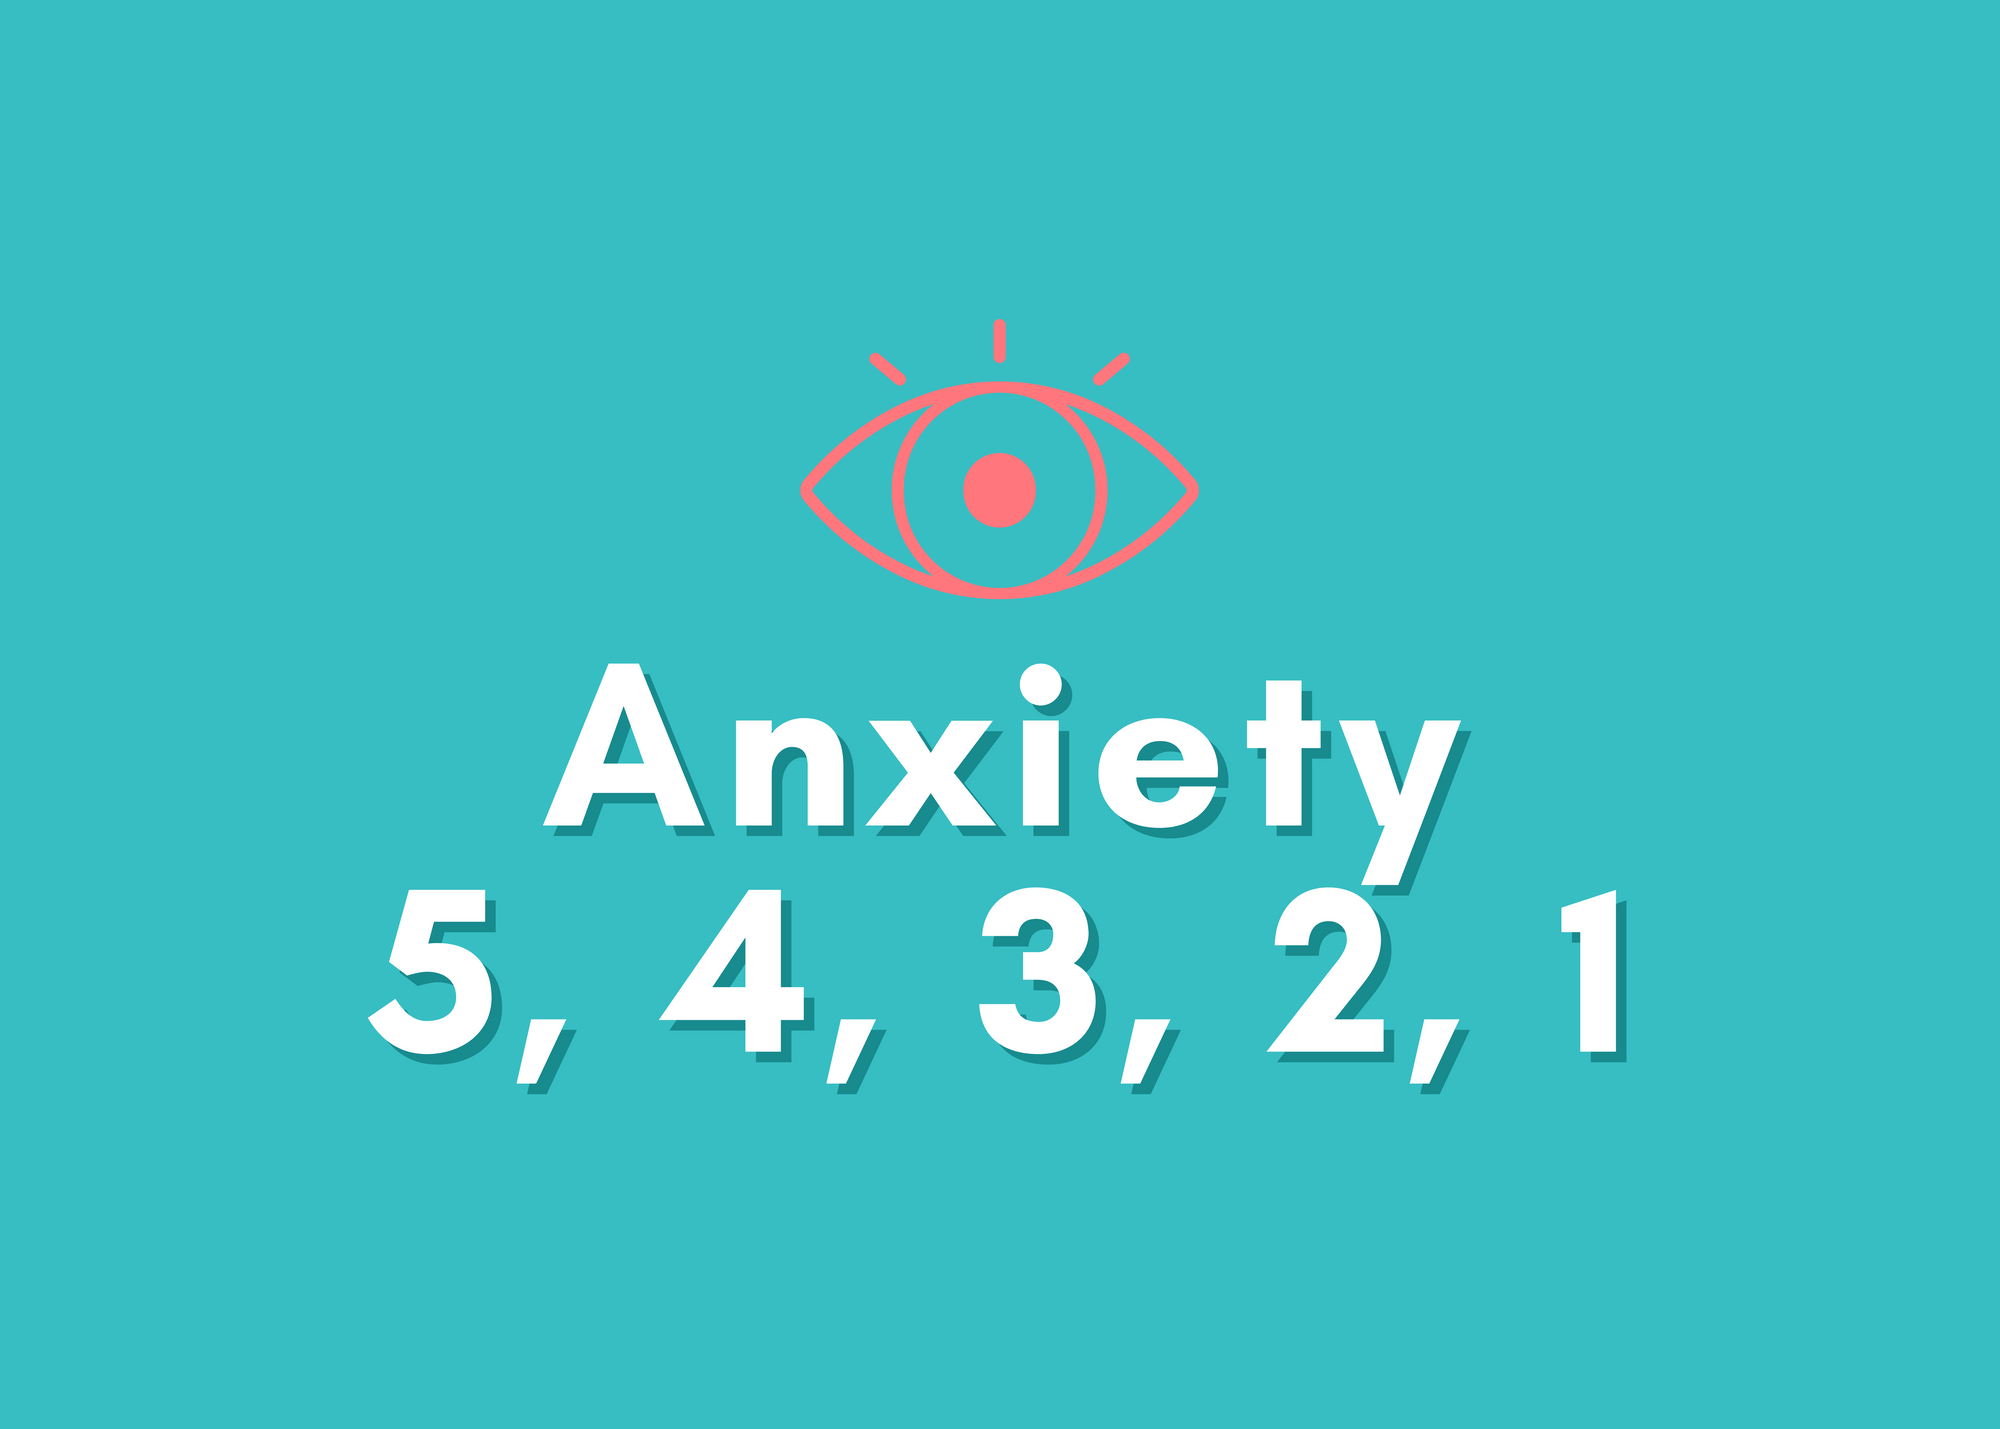 Anxiety 5 4 3 2 1 A Simple Grounding Technique For Anxiety